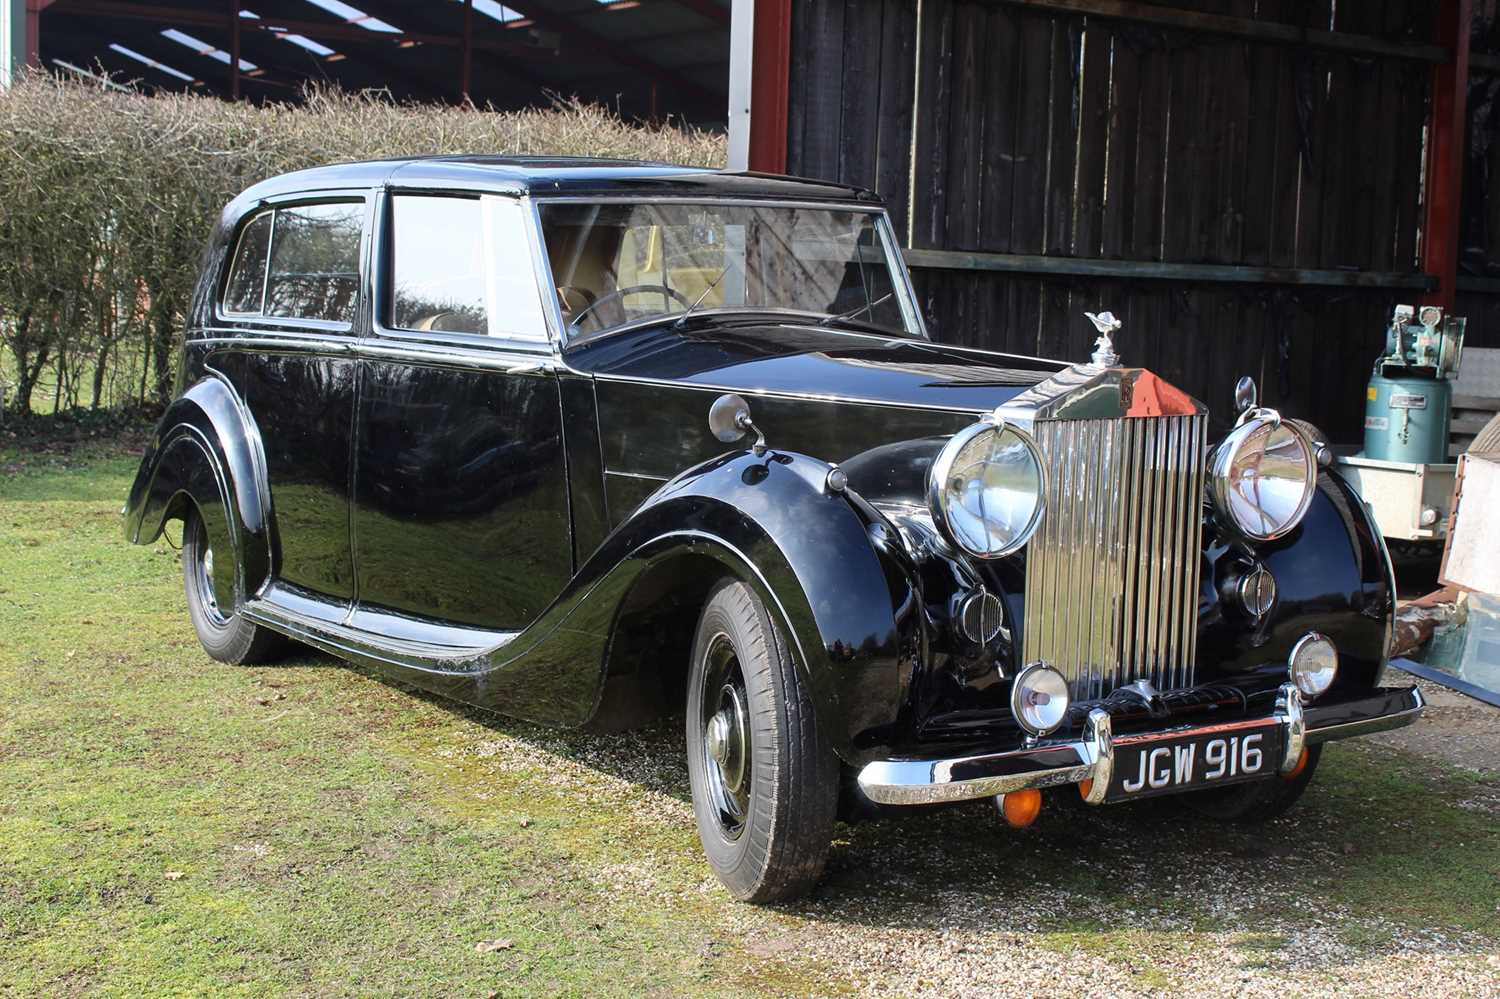 RollsRoyce Silver Wraith Classic Cars for Sale  Classics on Autotrader